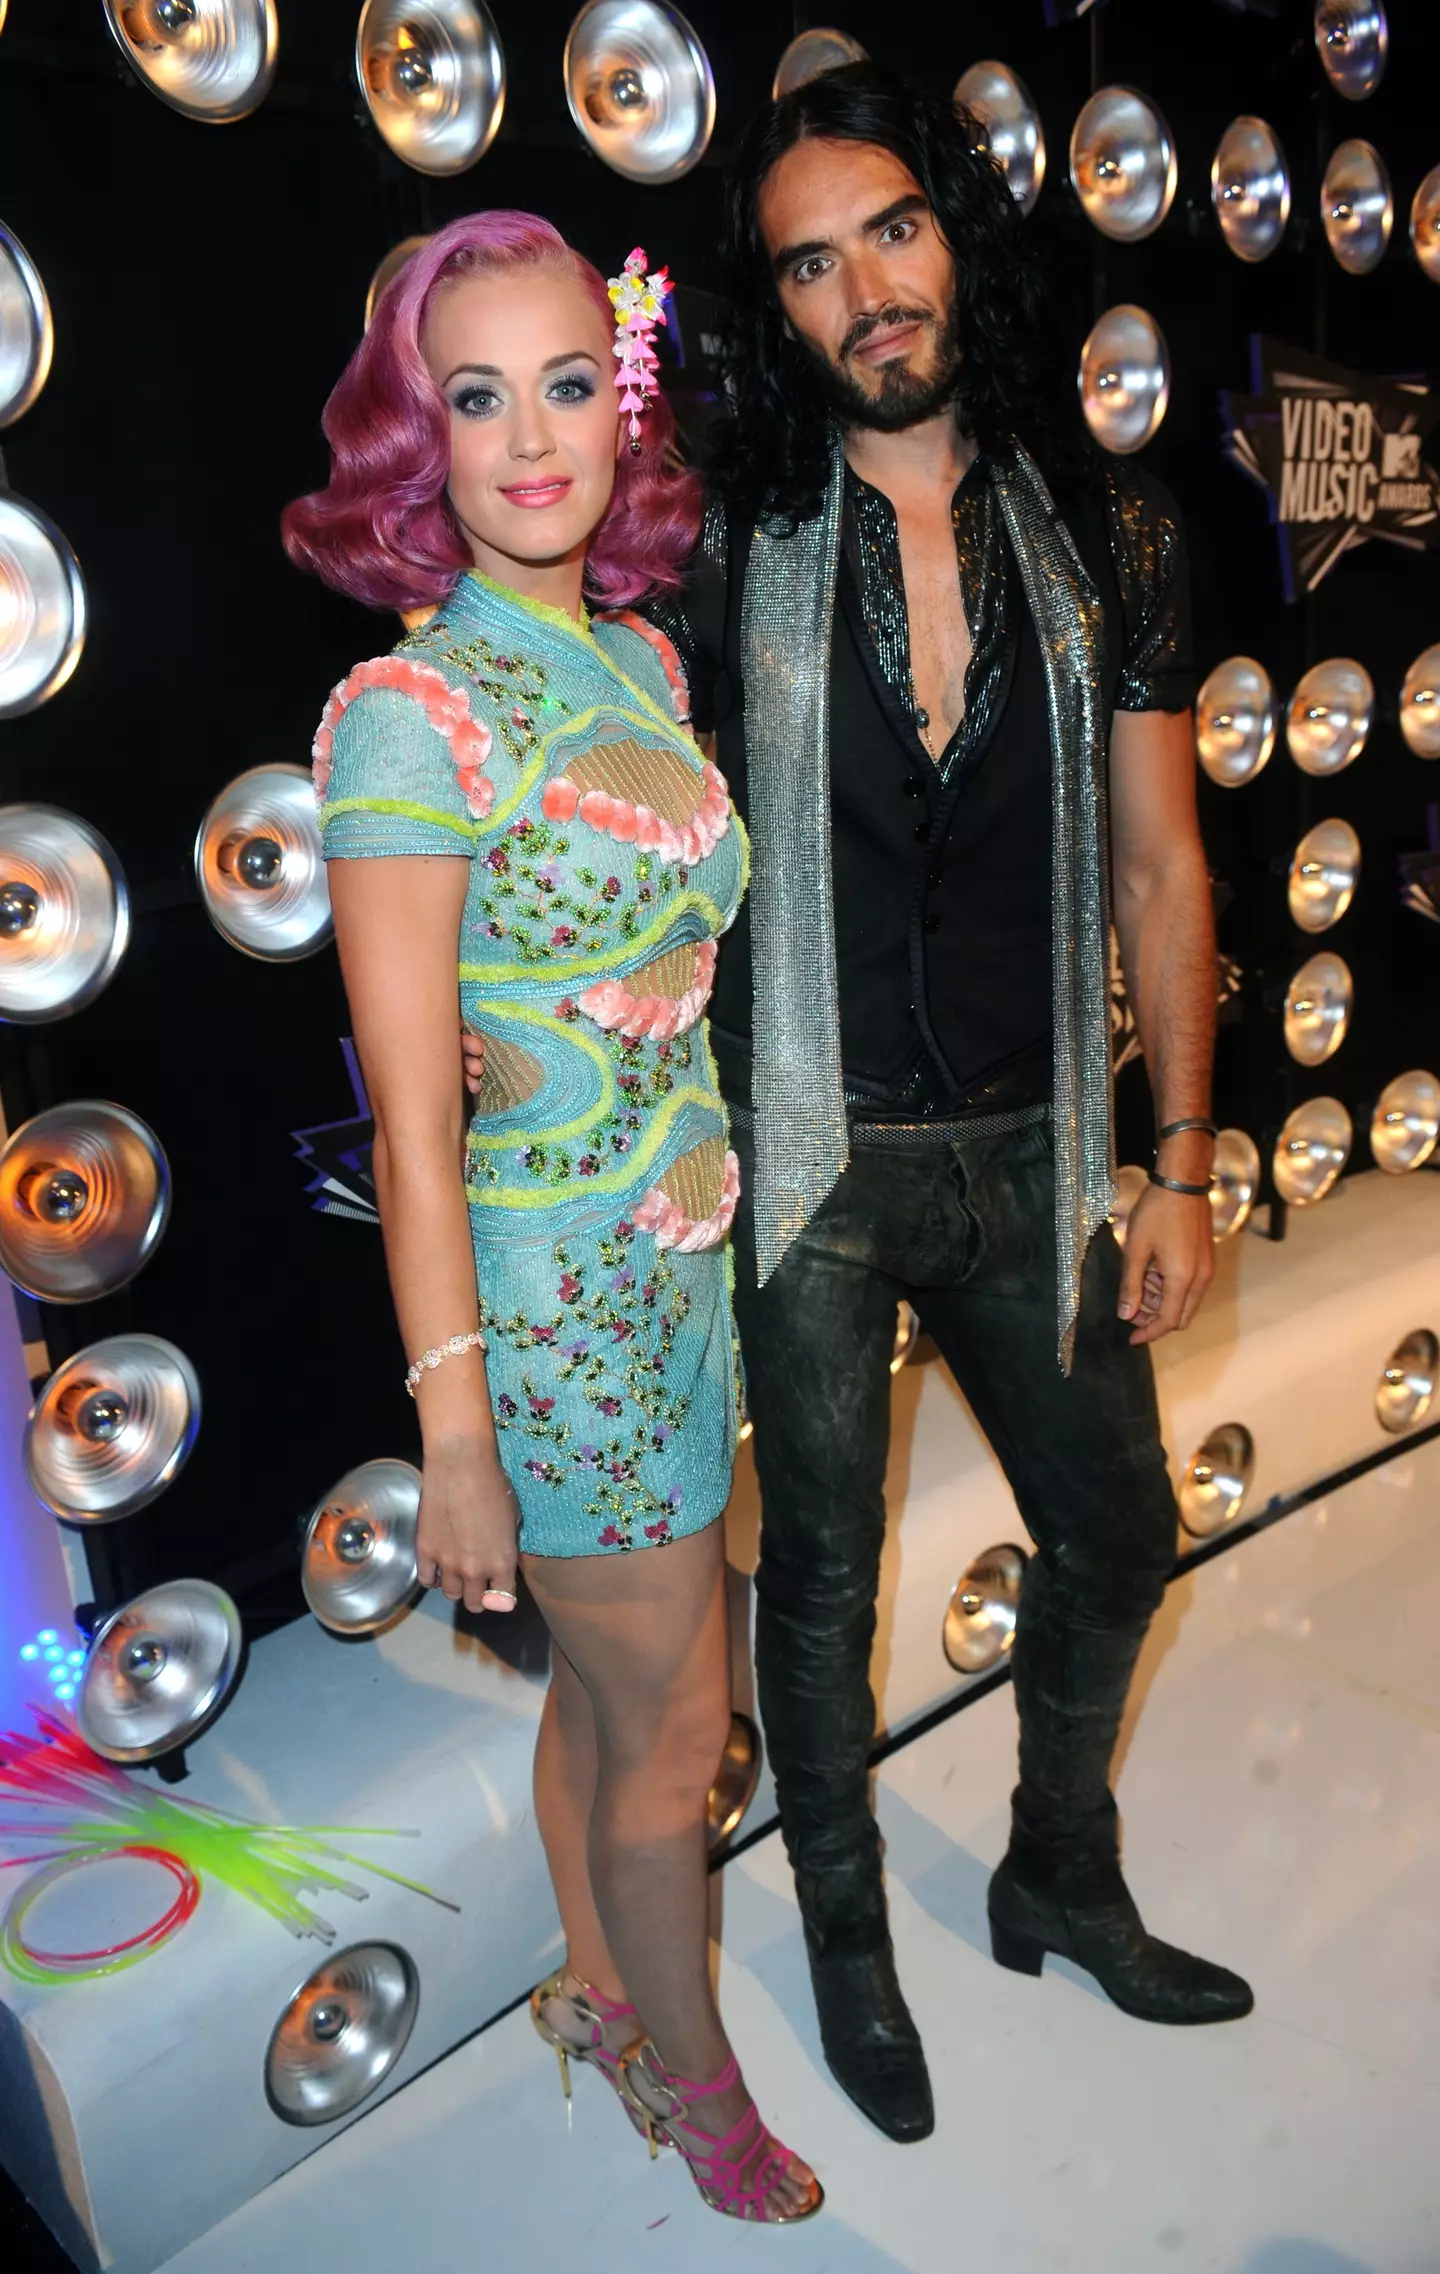 Katy Perry and Russell Brand got married in 2010.